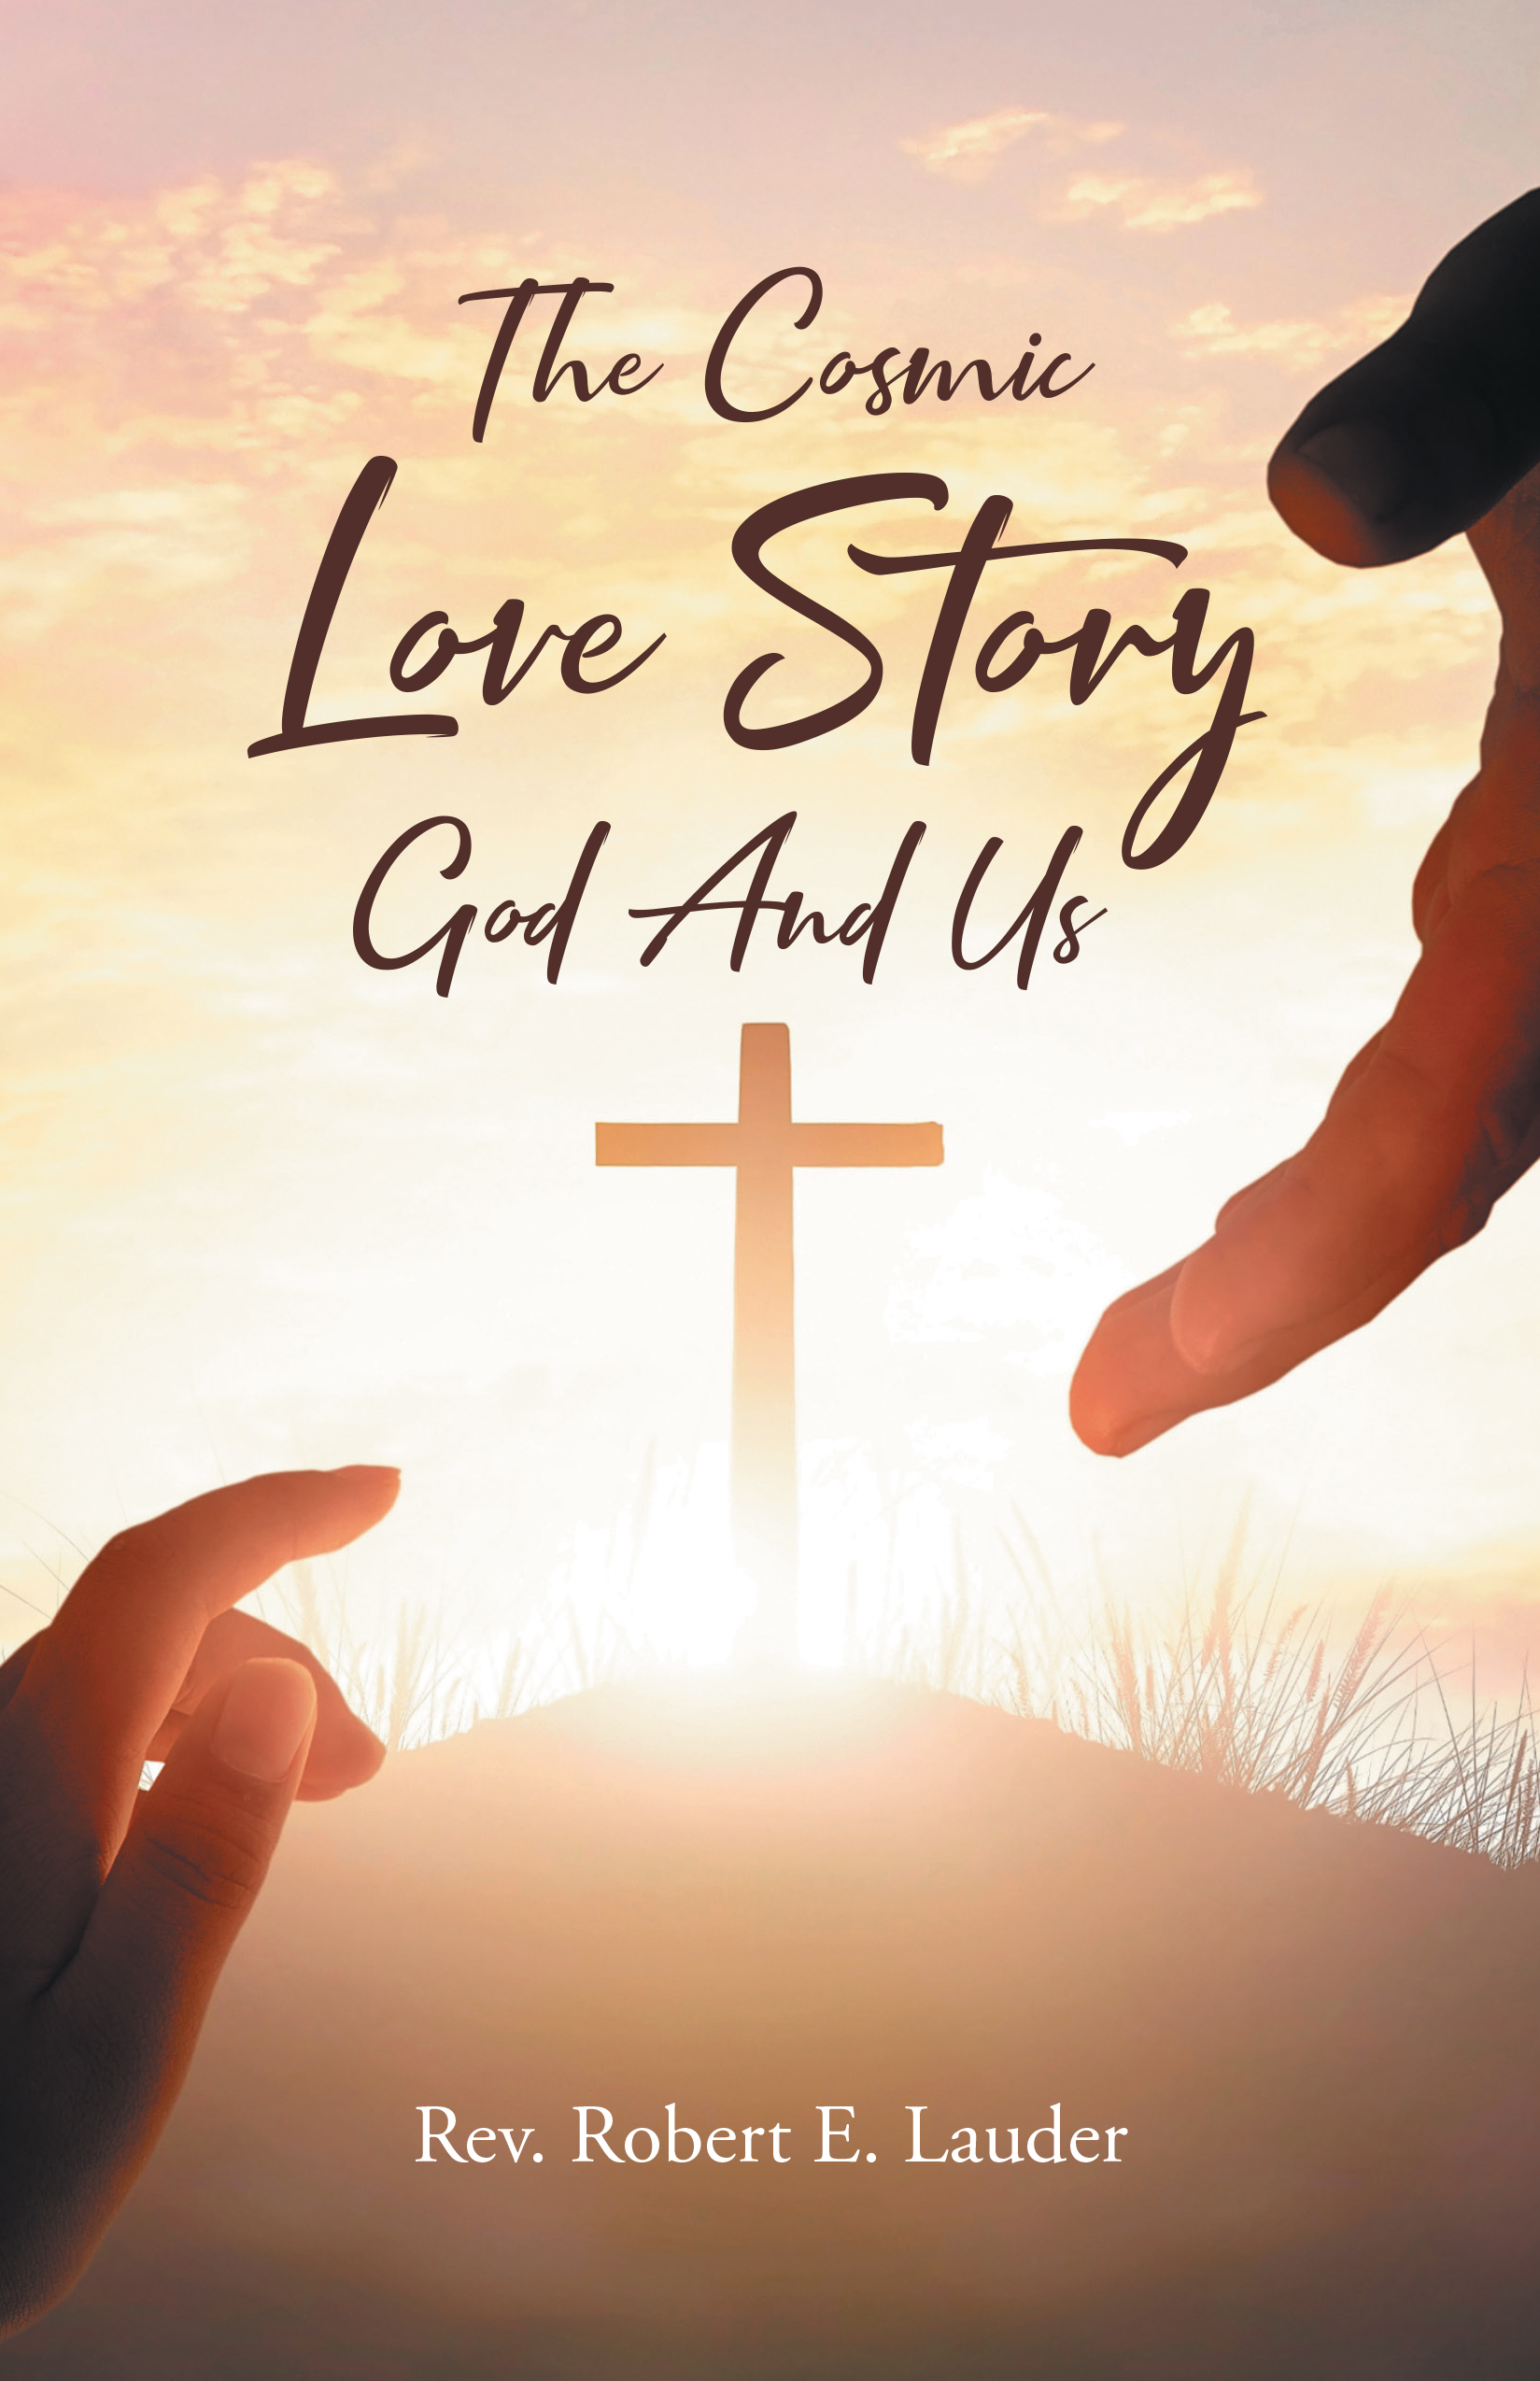 Rev. Robert E. Lauder’s Newly Released “The Cosmic Love Story God And Us” is a Profound Exploration of Divine and Human Love